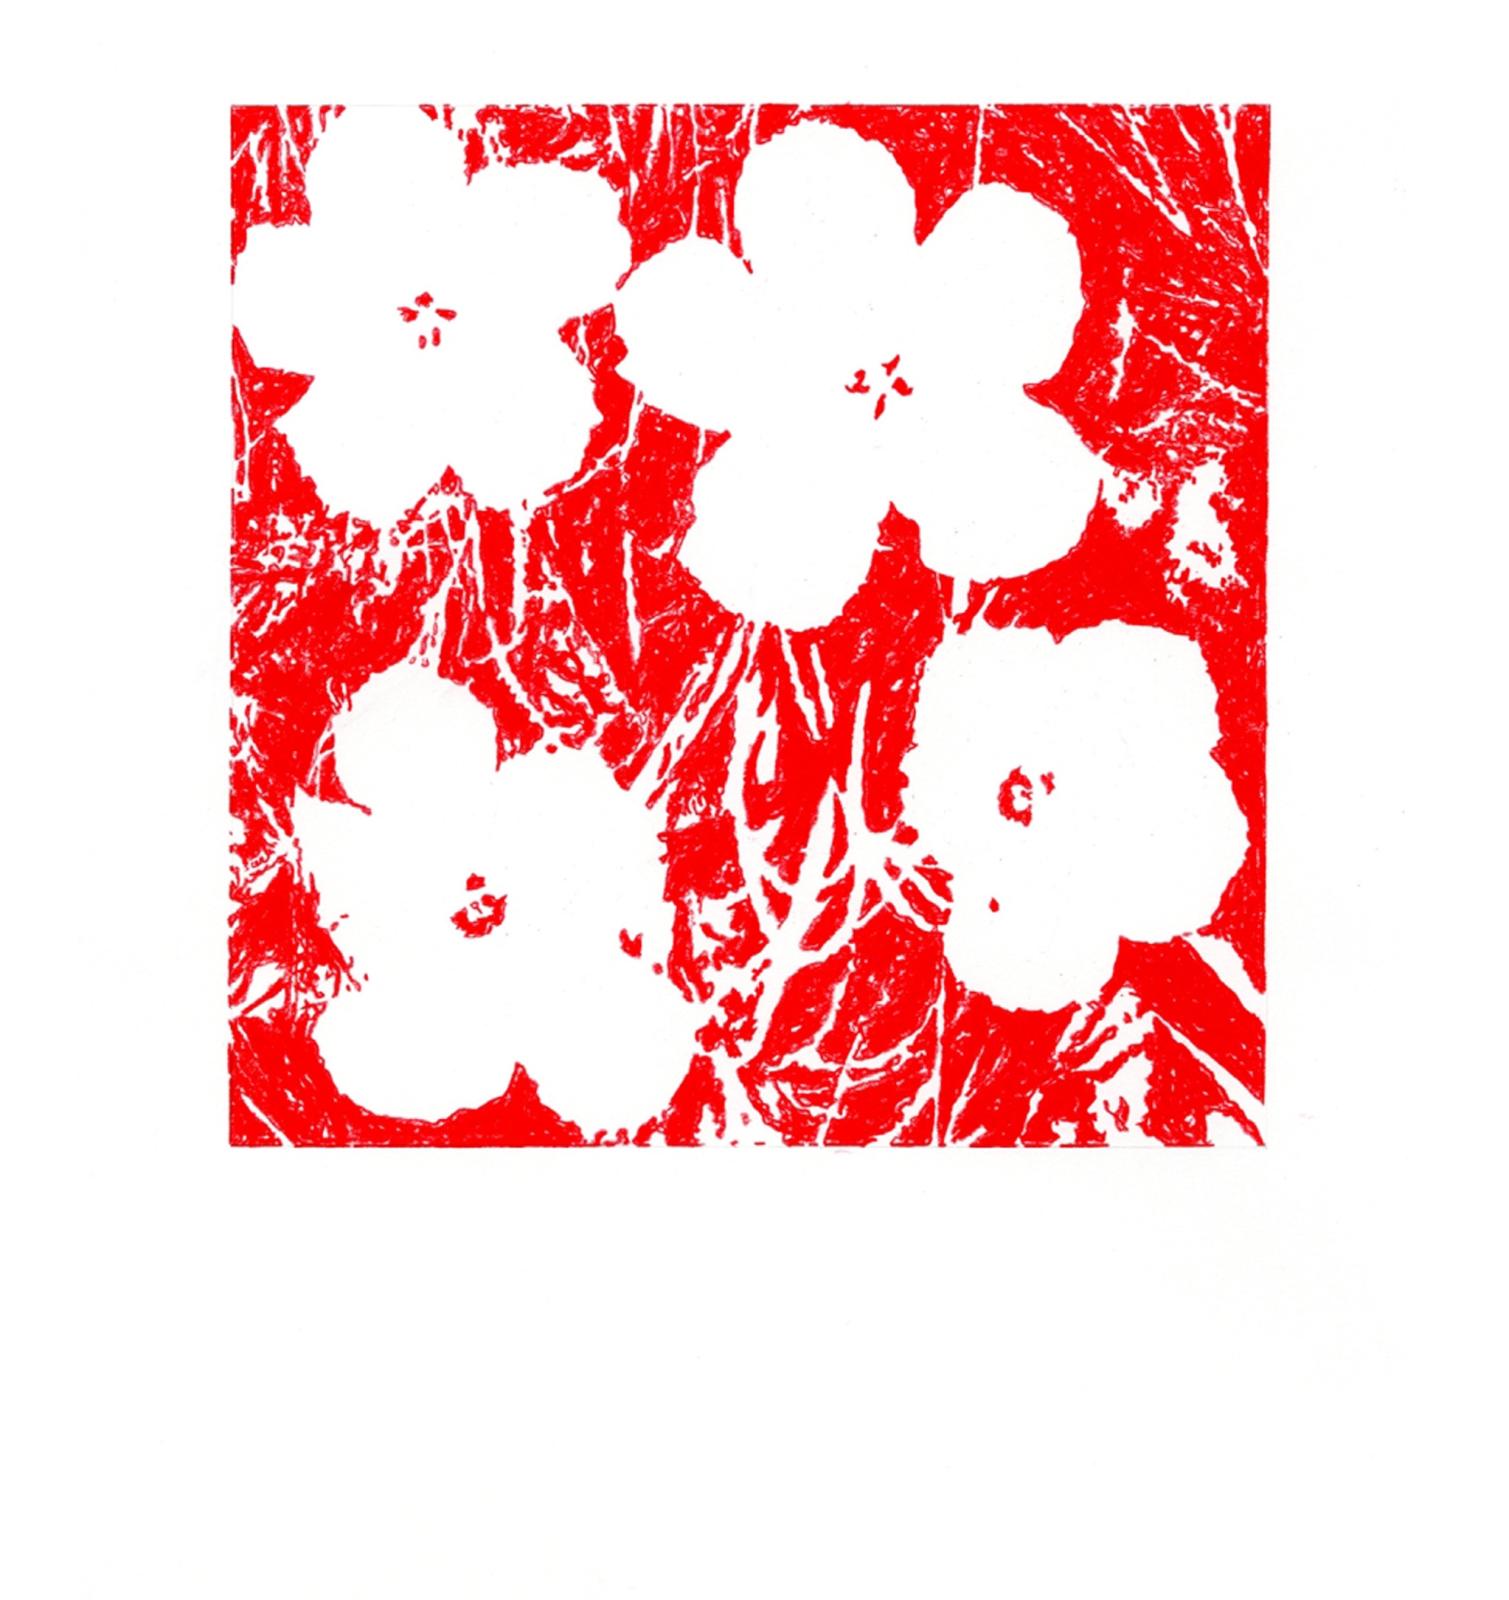 John Zinsser, After Andy Warhol, "Flowers," 1964 (Red), 2011